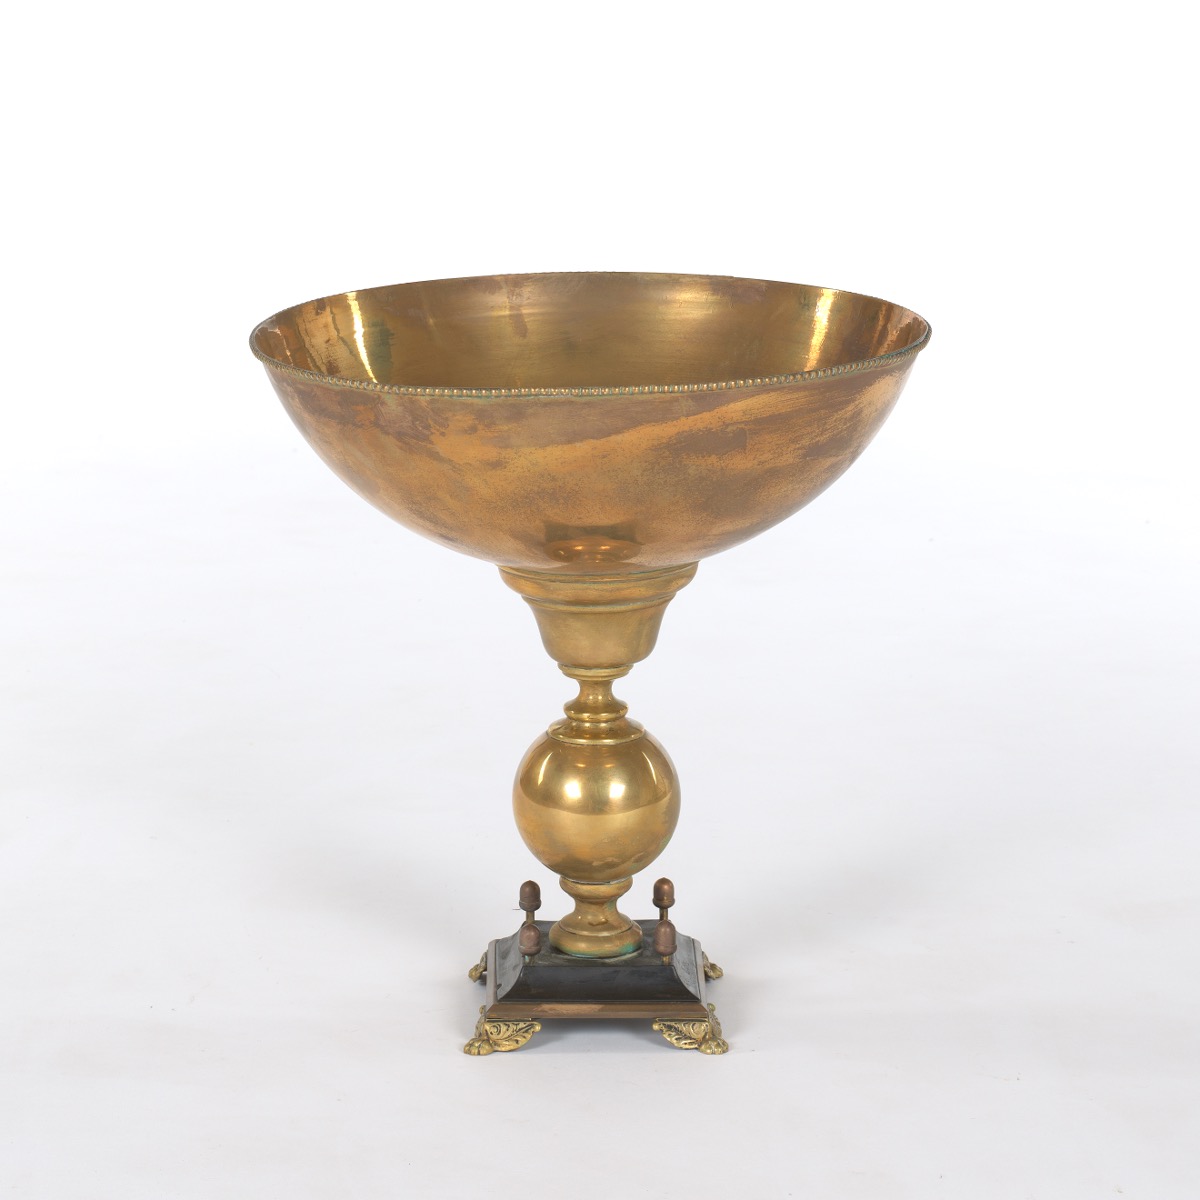 French Patinated Brass and Black Slate Centerpiece Bowl, ca. 19th Century - Image 3 of 7